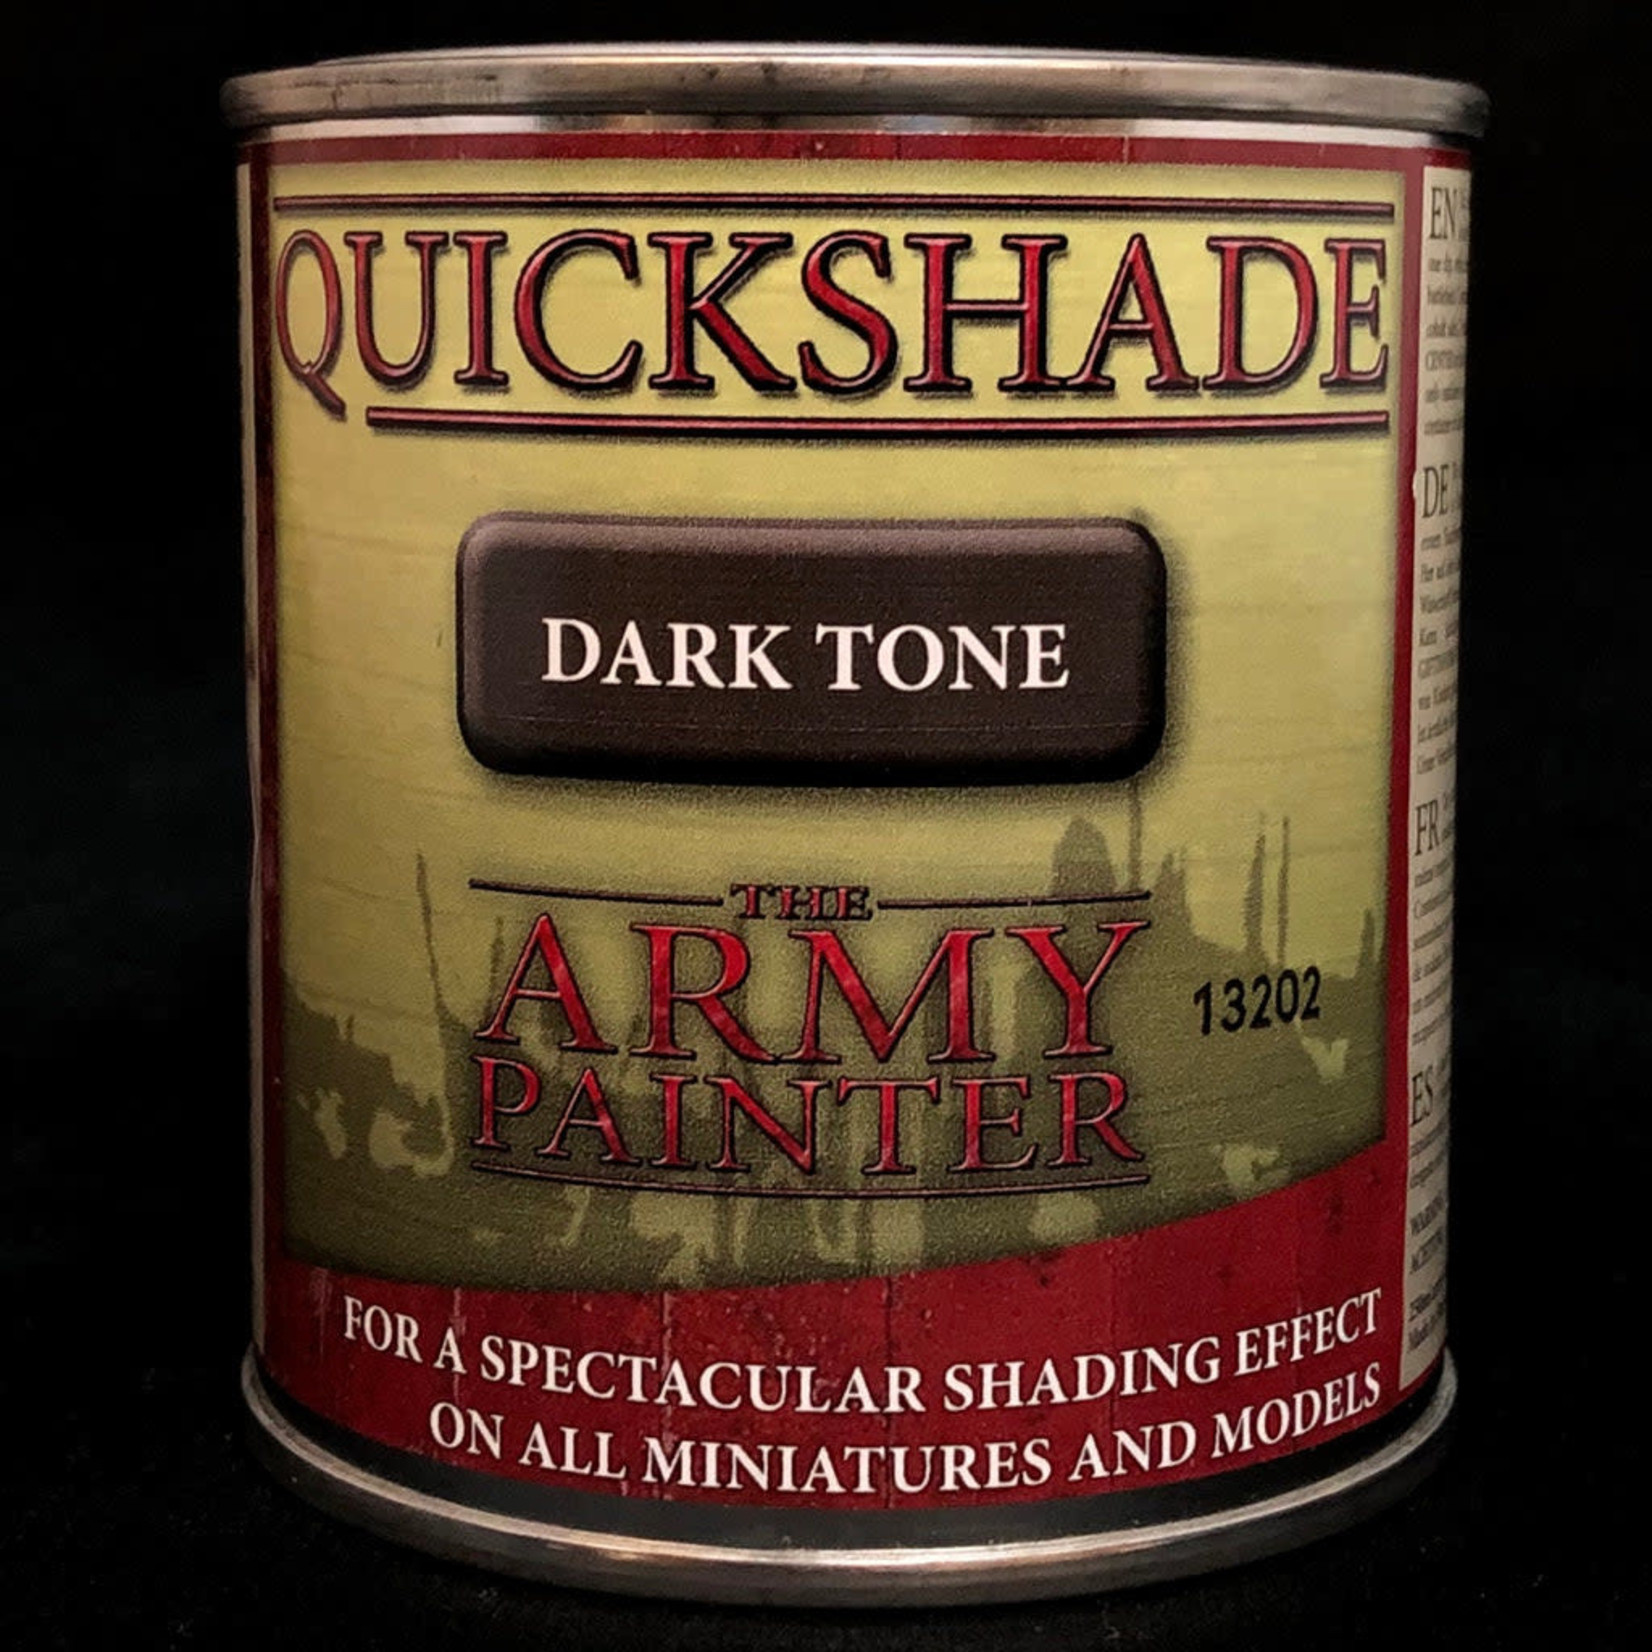 The Army Painter The Army Painter Dark Tone 250ml can